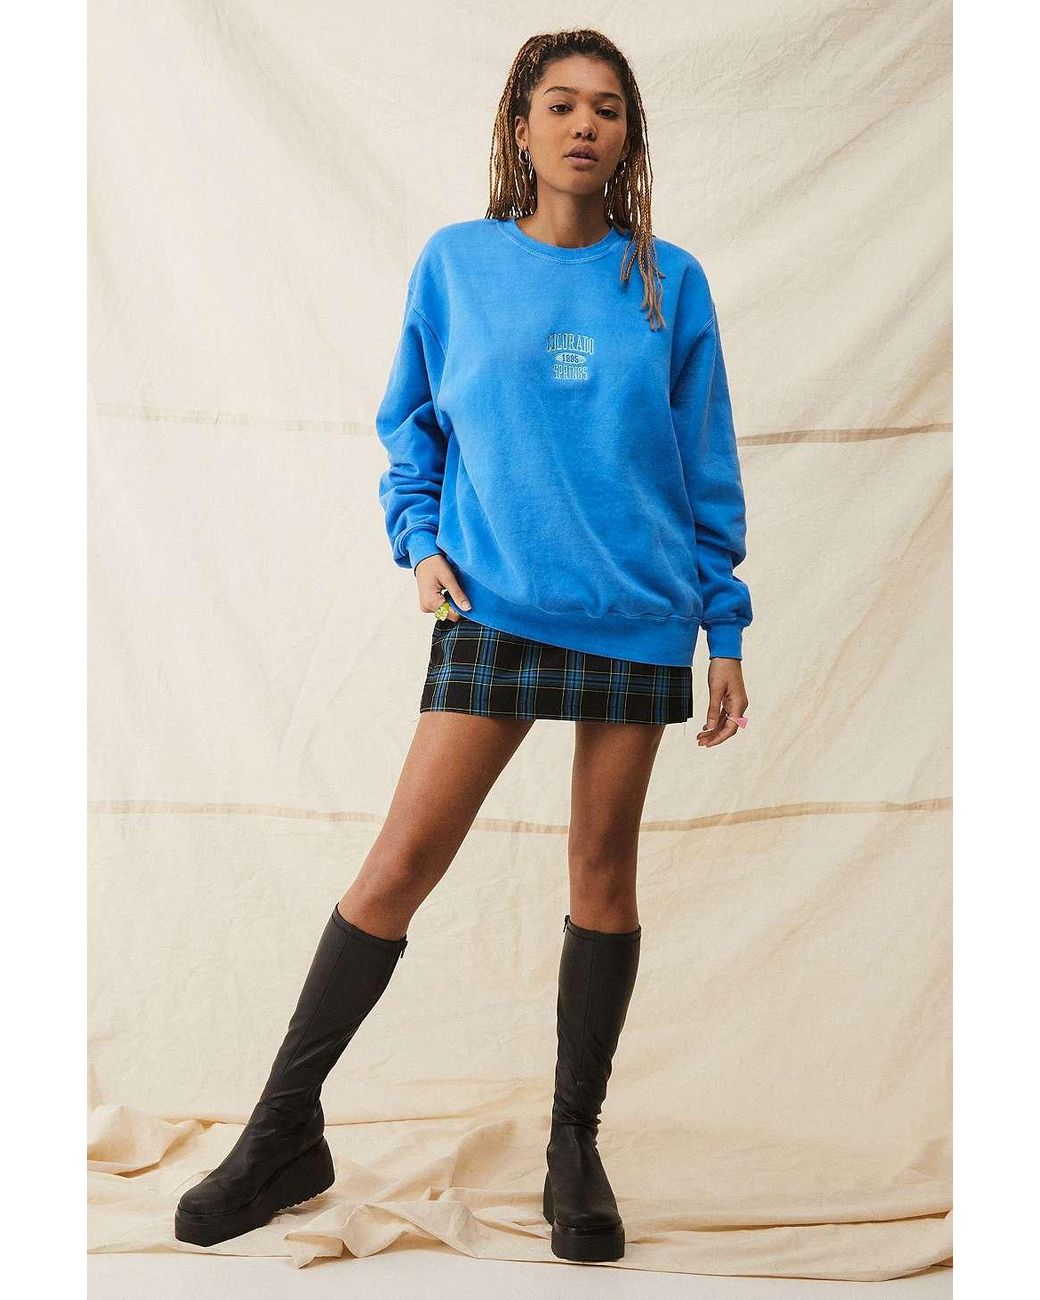 Urban Outfitters Uo Colorado Springs Sapphire Crew Neck Sweatshirt in Blue  | Lyst UK